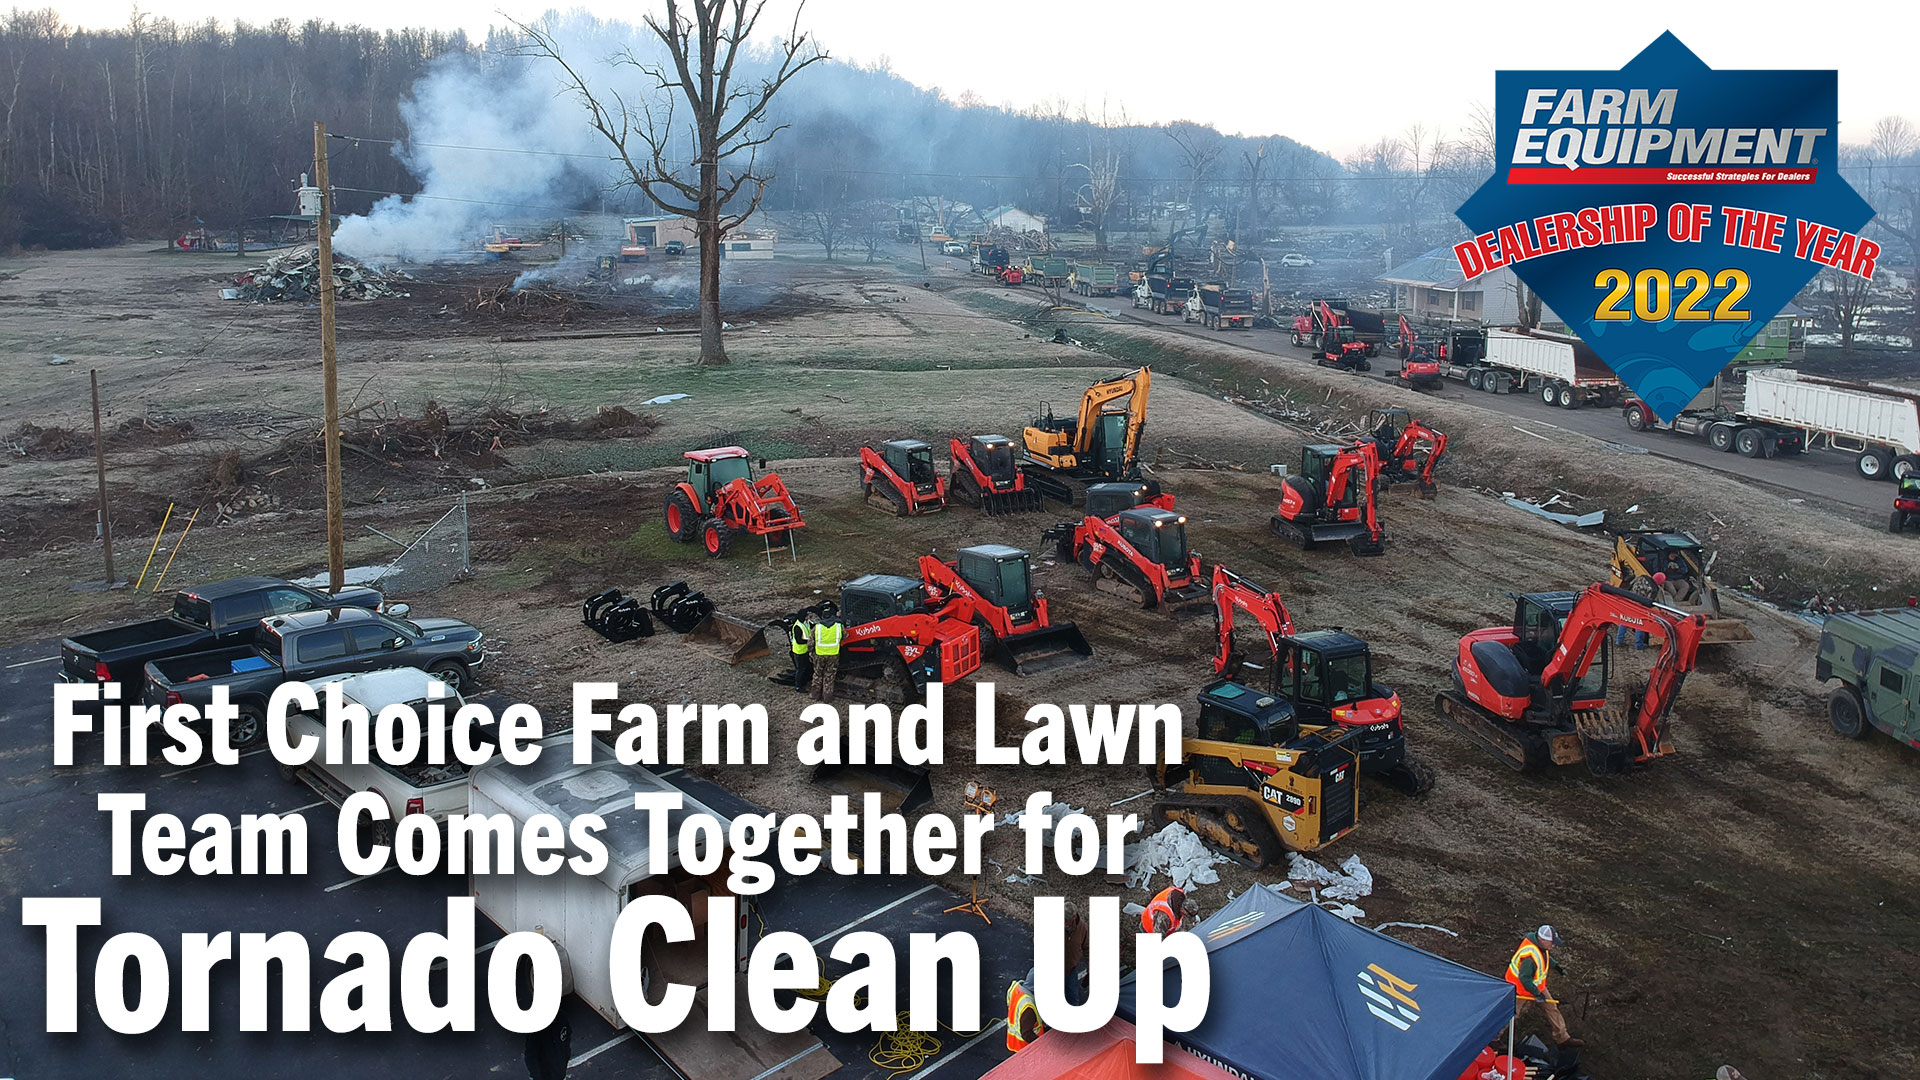 3-First-Choice-Farm-and-Lawn-Team-Comes-Together-for-Tornado-Clean-Up.jpg